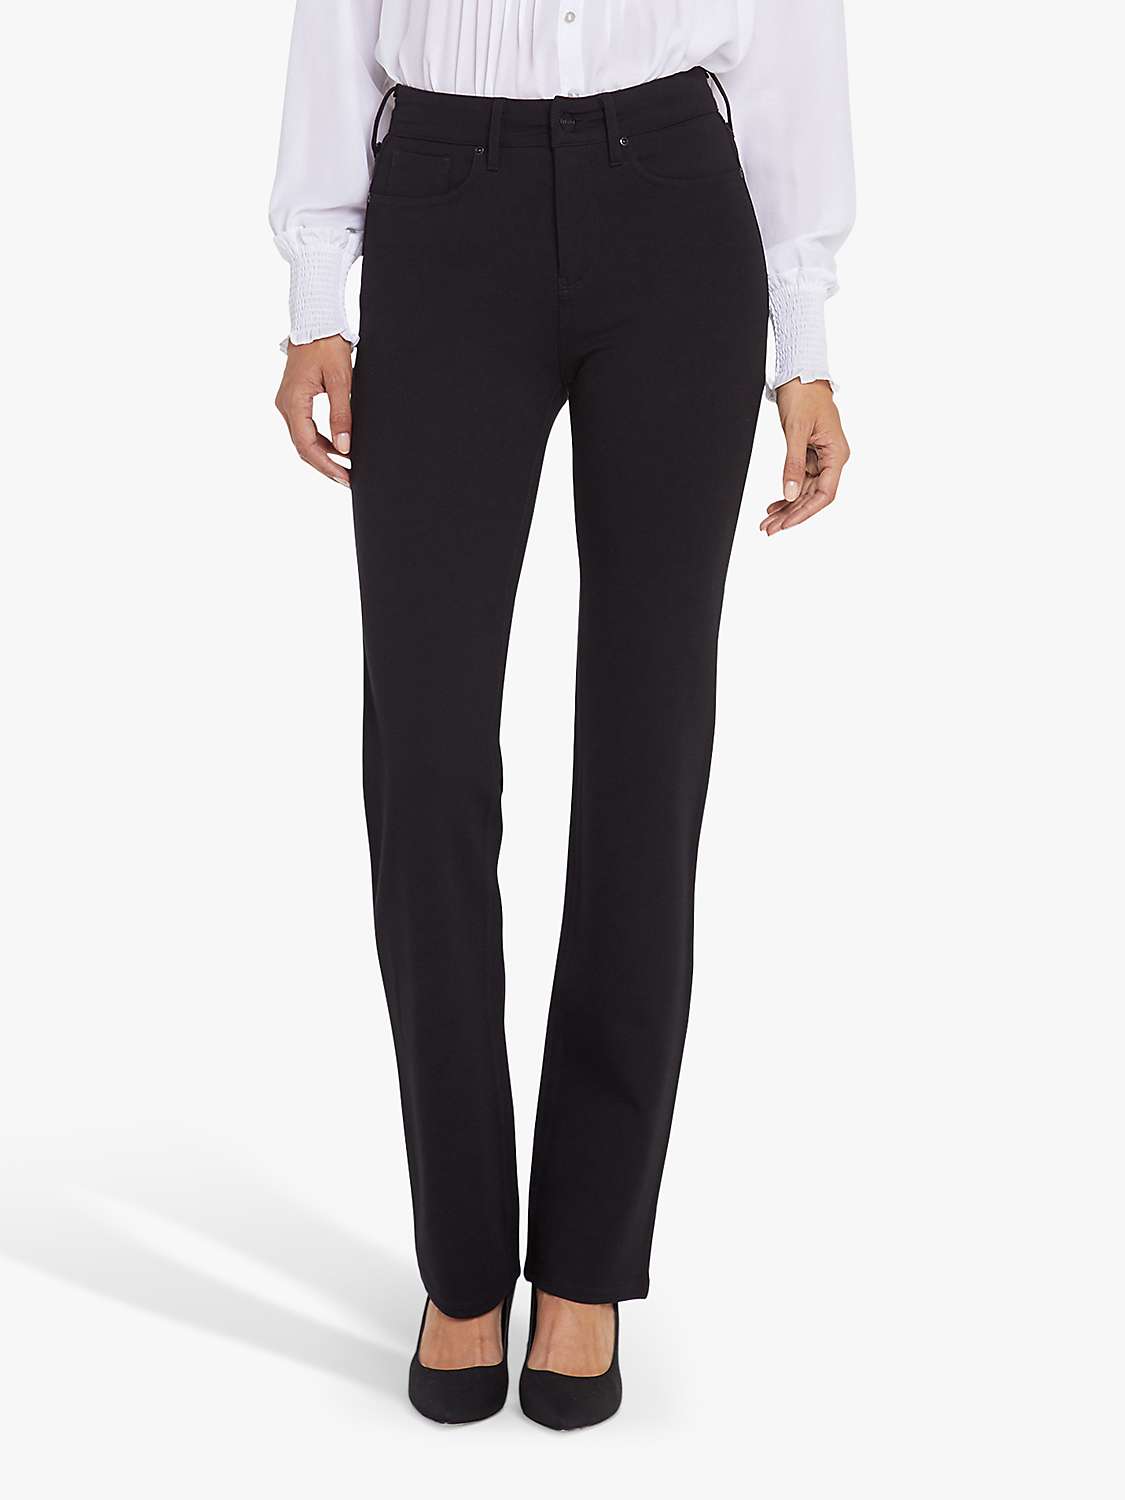 Buy NYDJ Sculpt Her Marilyn Straight Leg Jersey Trousers Online at johnlewis.com